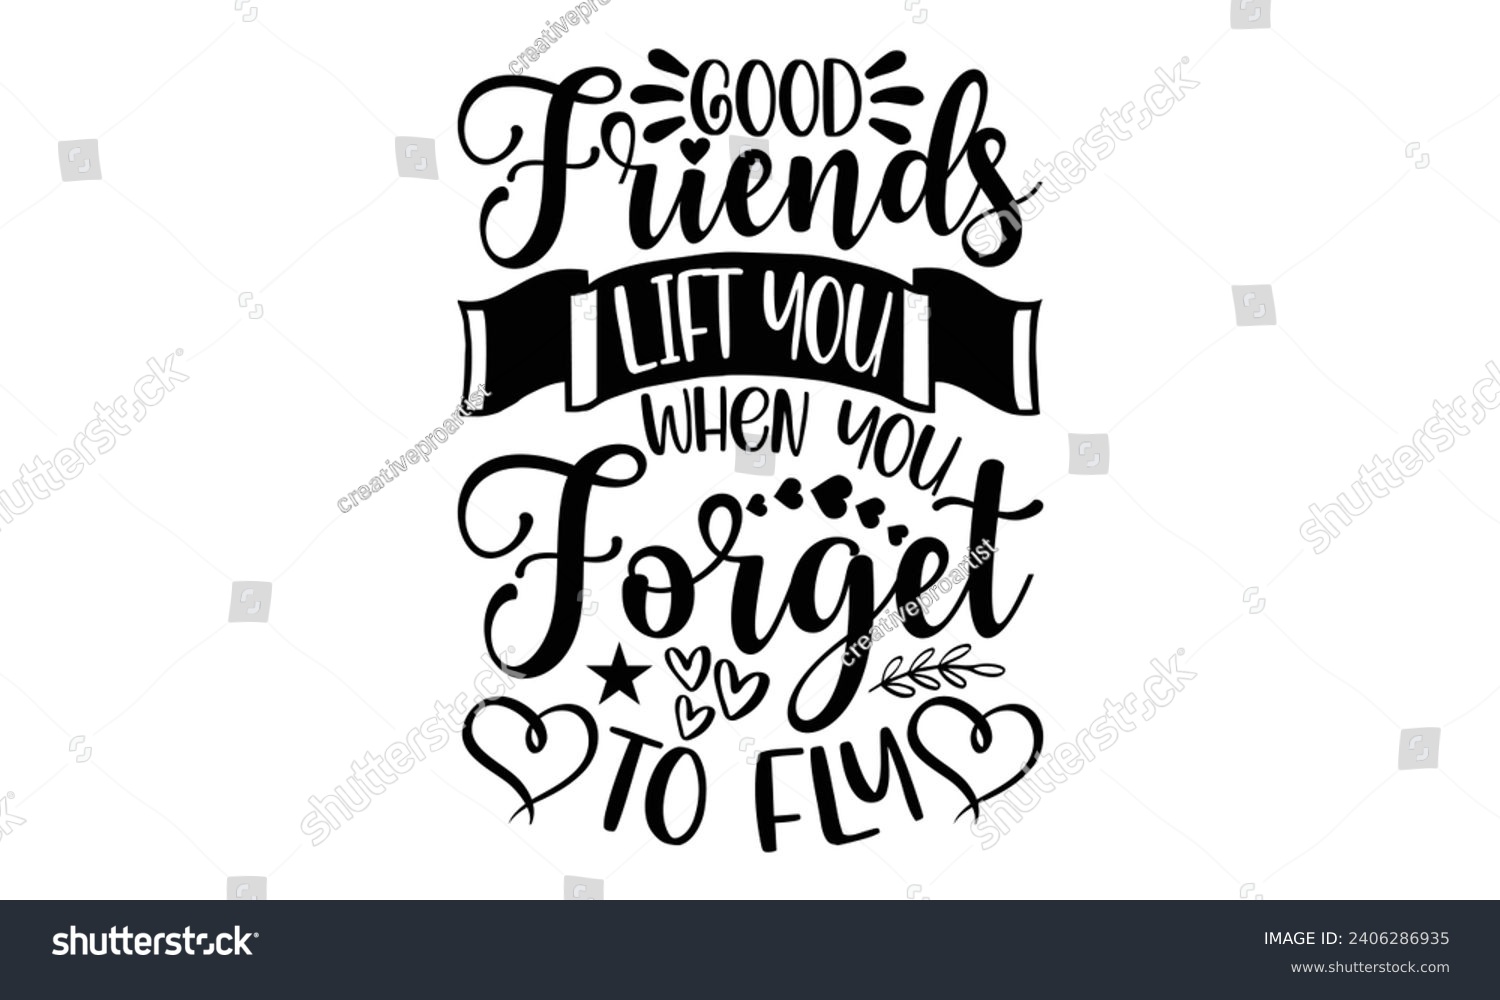 SVG of Good Friends Lift You When You Forget To Fly- Best friends t- shirt design, Hand drawn vintage illustration with hand-lettering and decoration elements, greeting card template with typography text svg